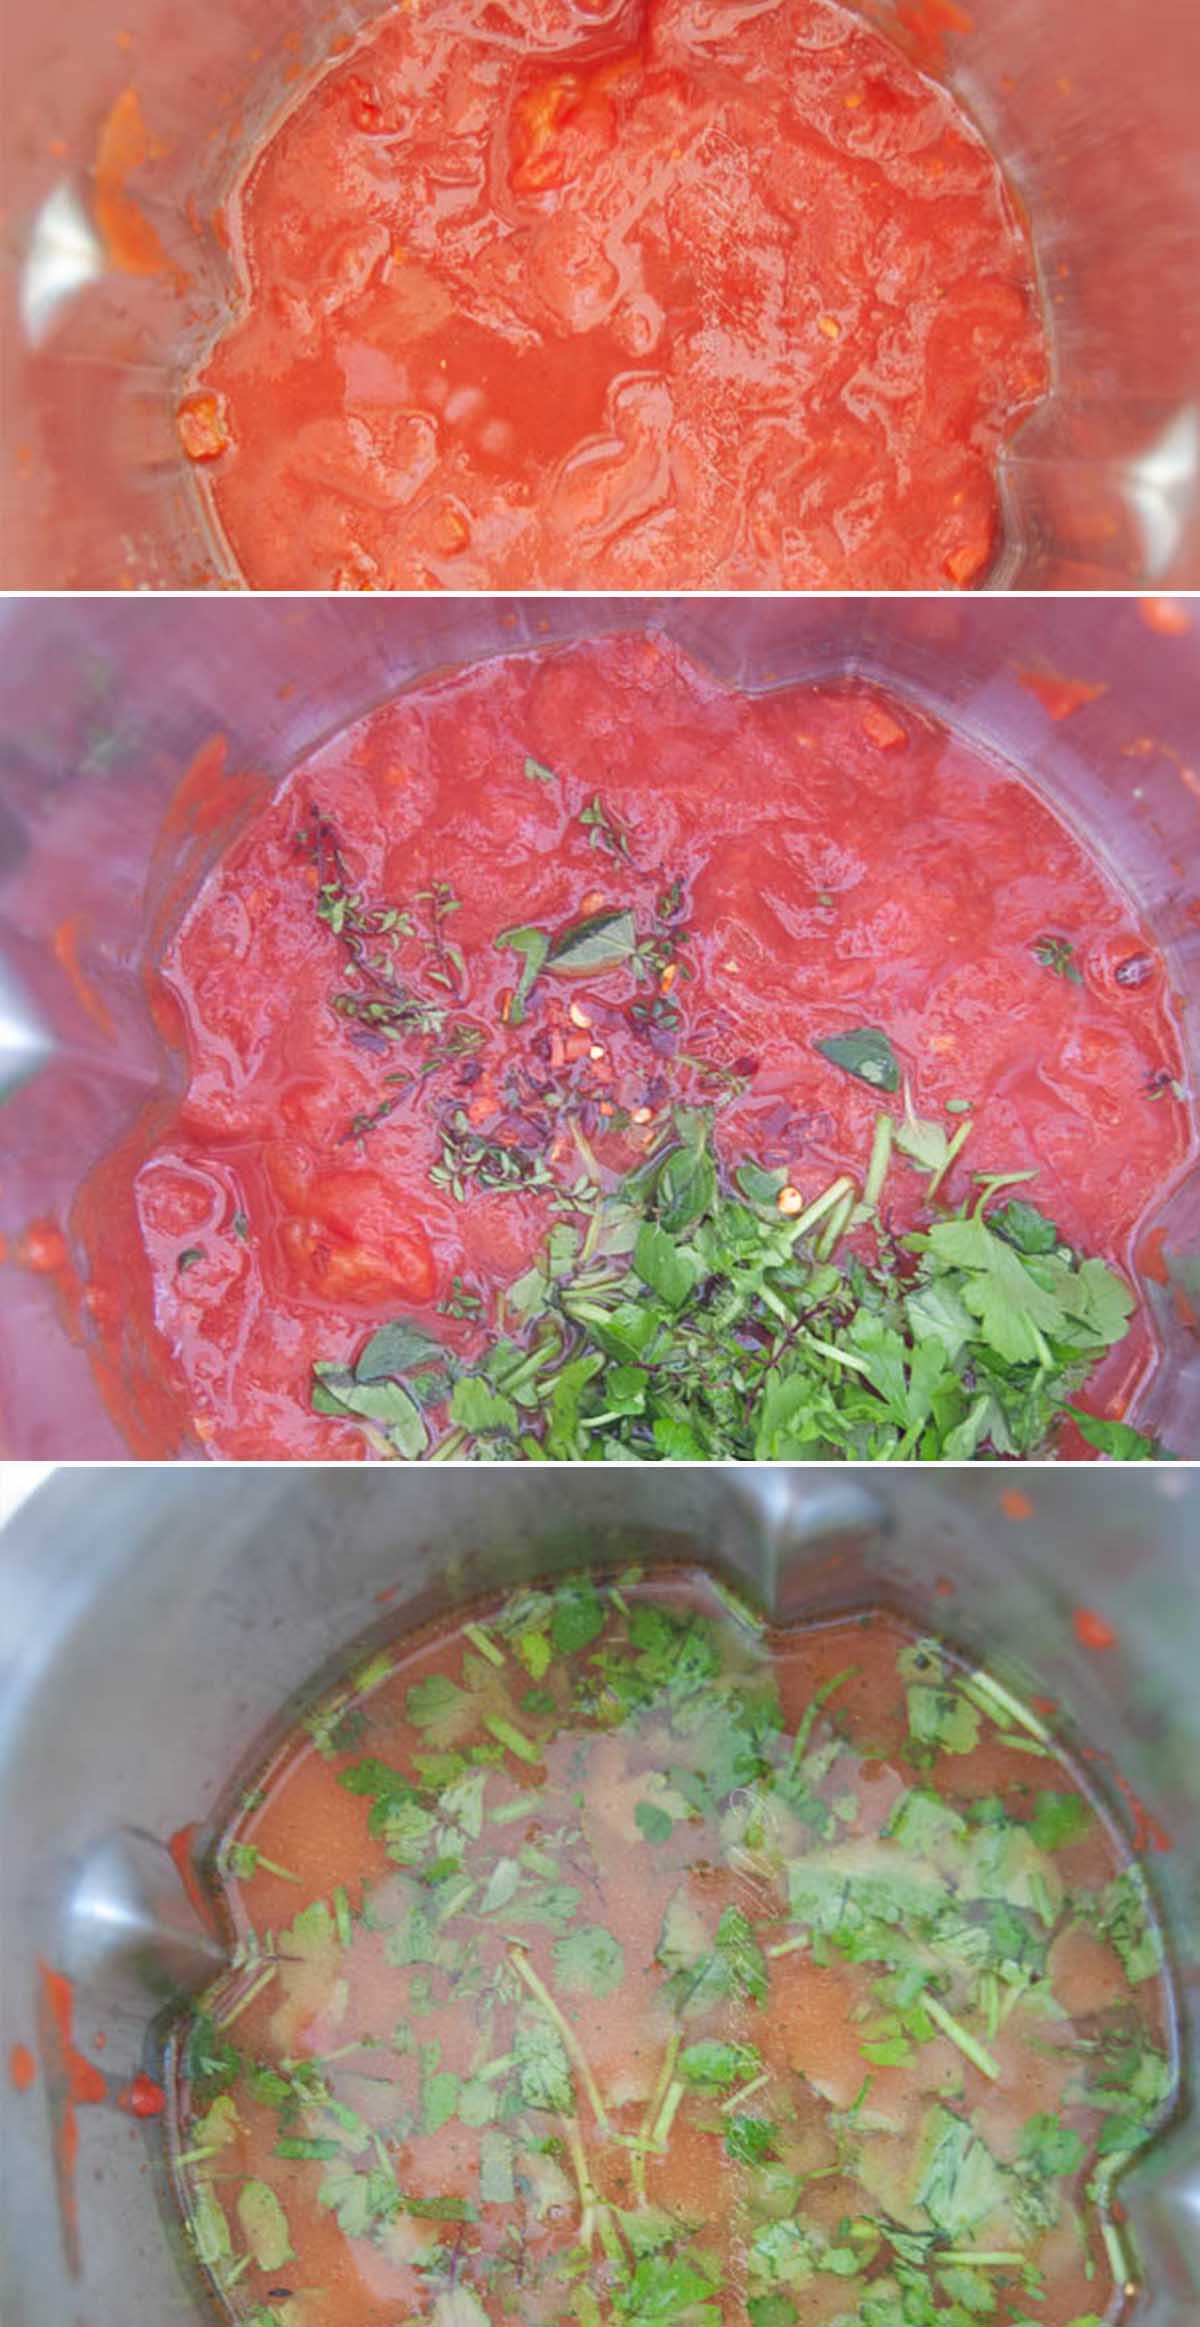 A photo collage of three photos: top - canned tomatoes in soup maker; middle - chopped tomatoes and added herbs; bottom - tomatoes, herbs and added stock.